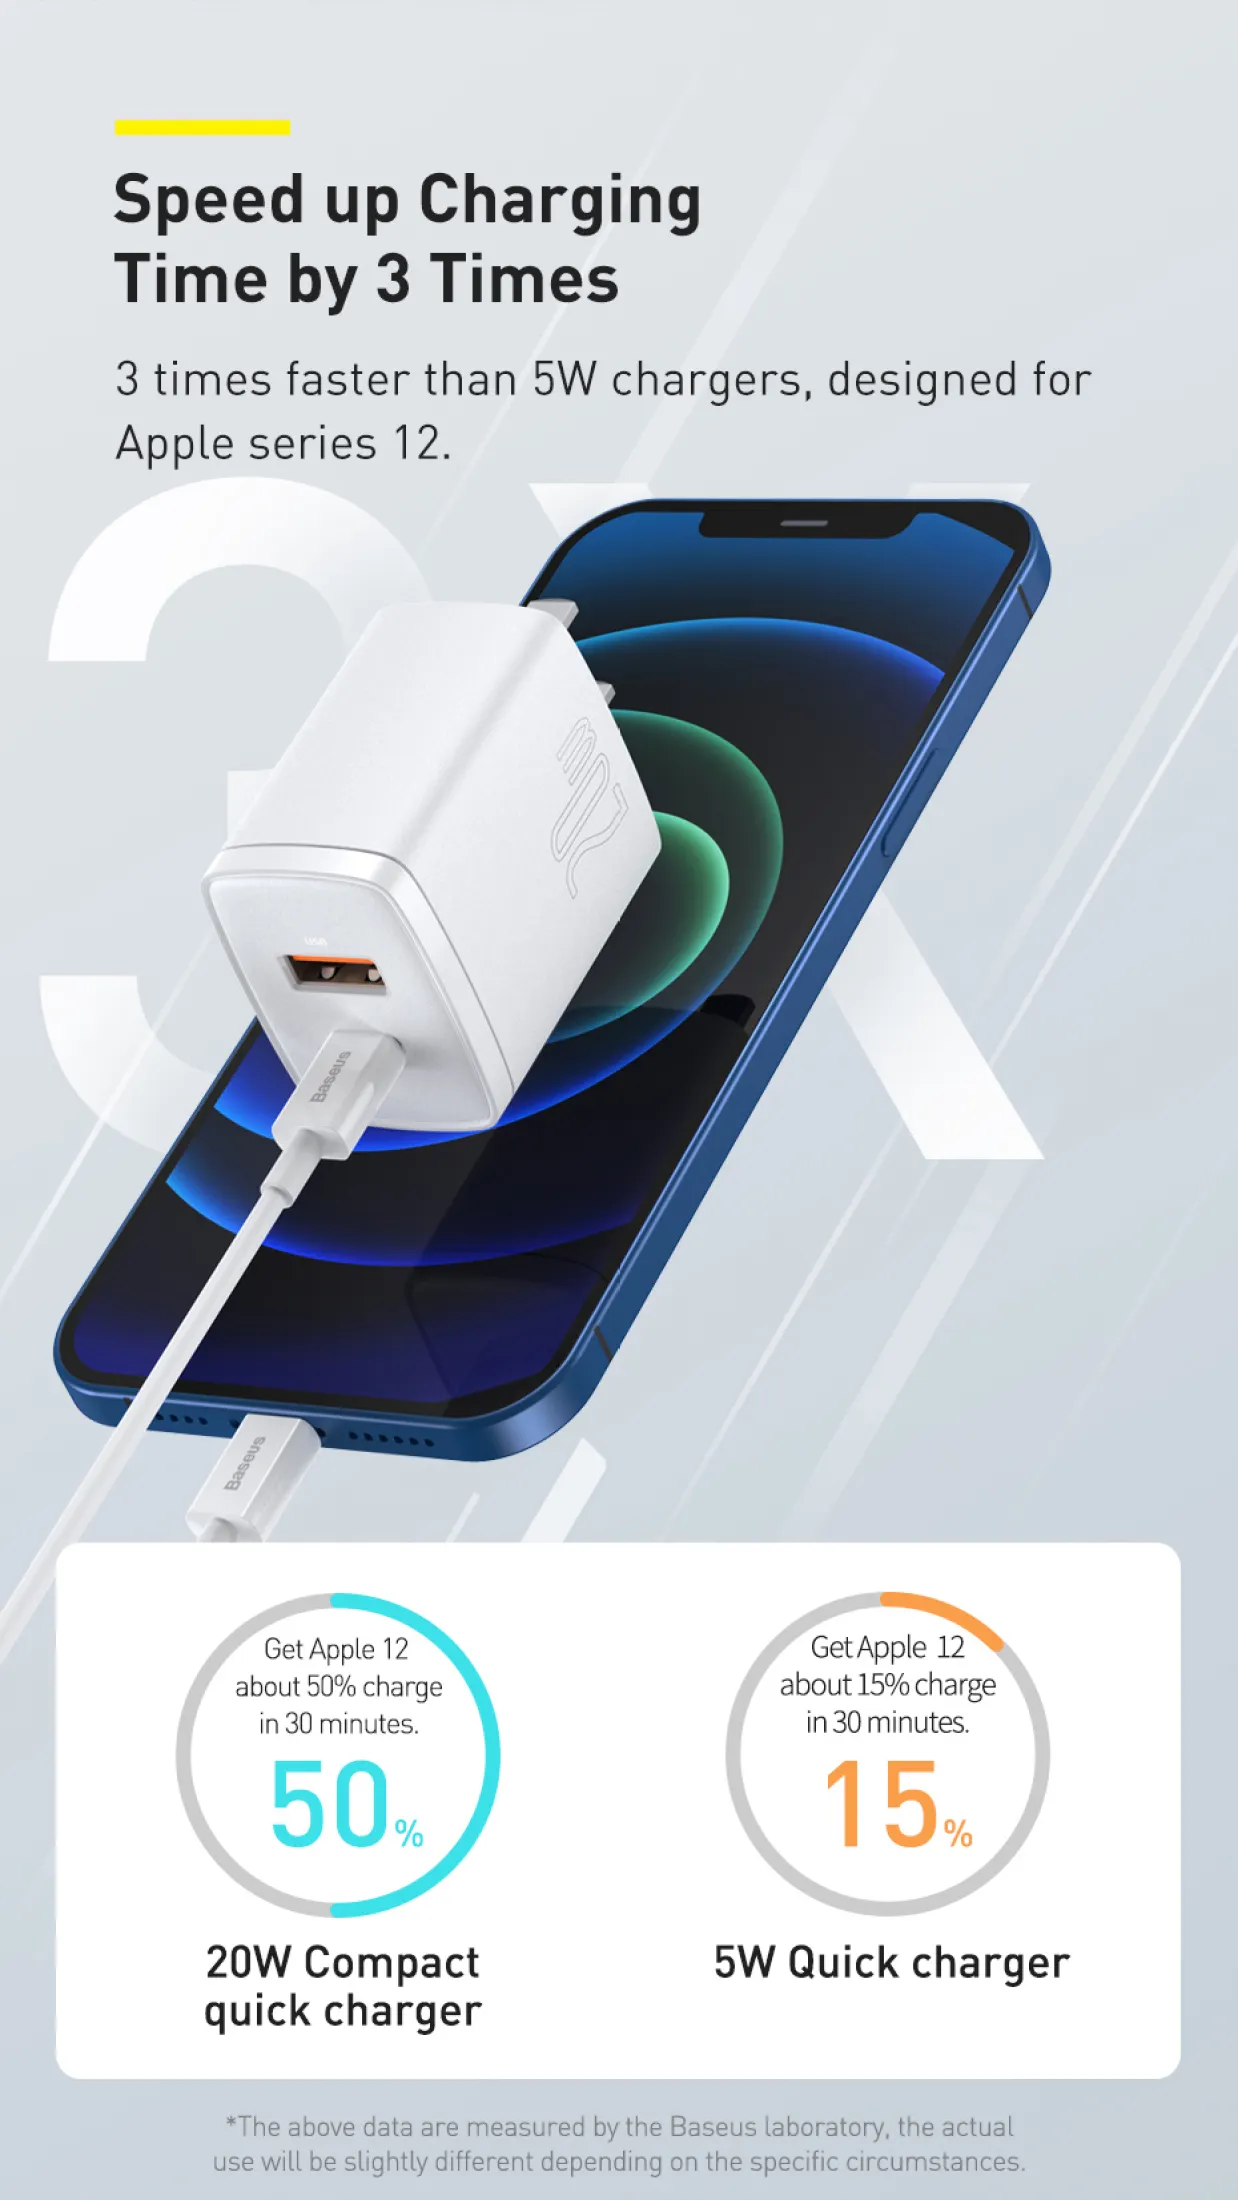 Baseus Compact Quick 20W Charger USB + Type-C Wall Charger buy online best price in pakistan